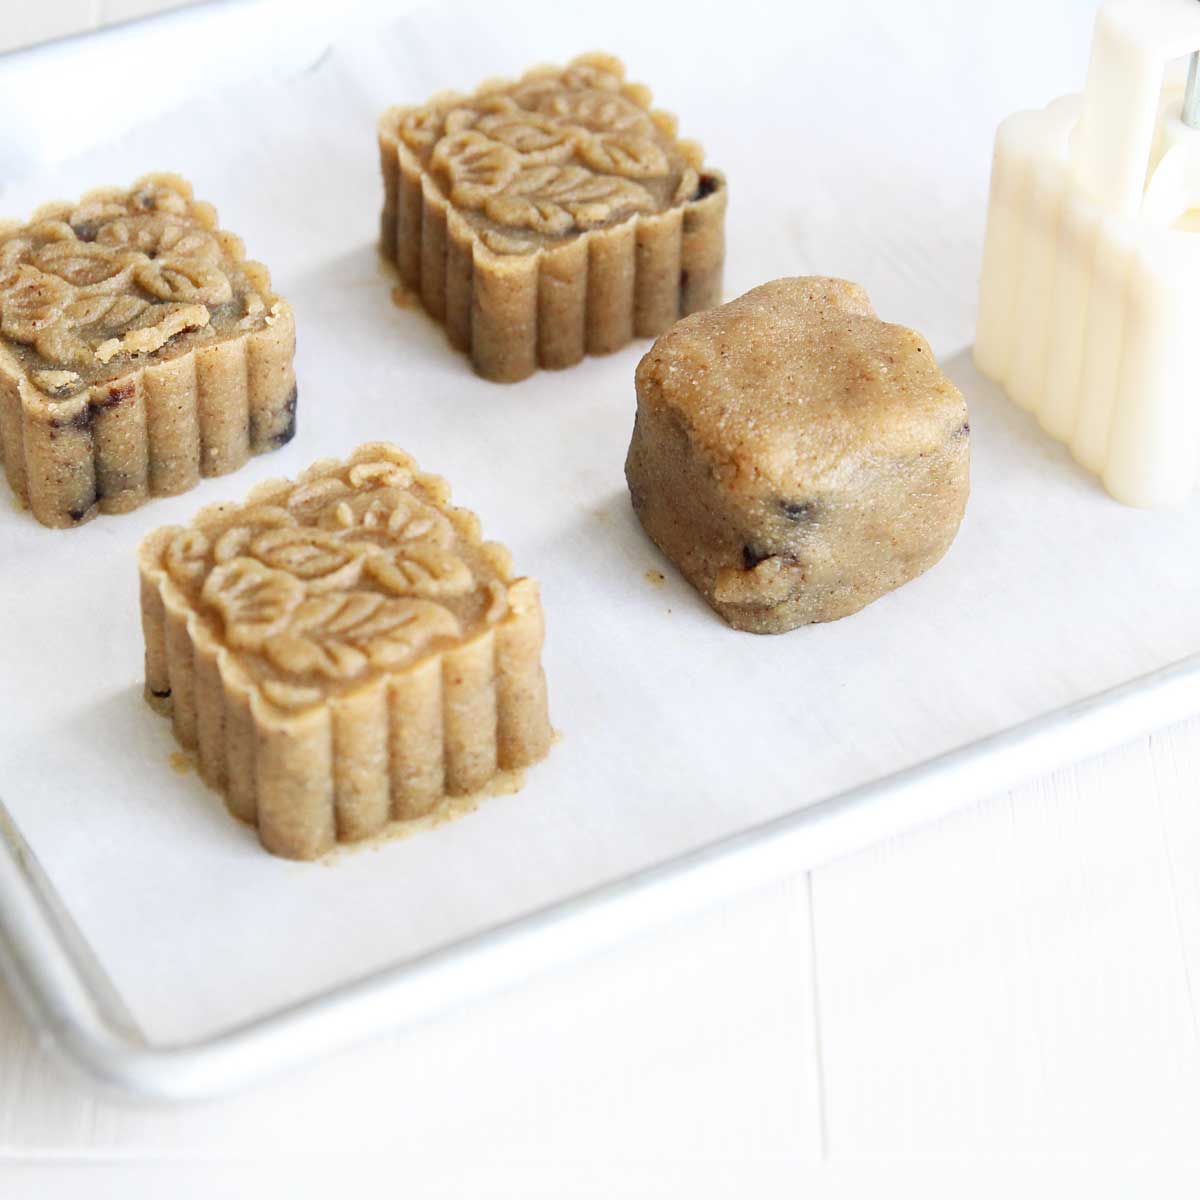 Walnut Butter Mooncakes with a Surprise Brownie Filling - Walnut Butter Mooncakes